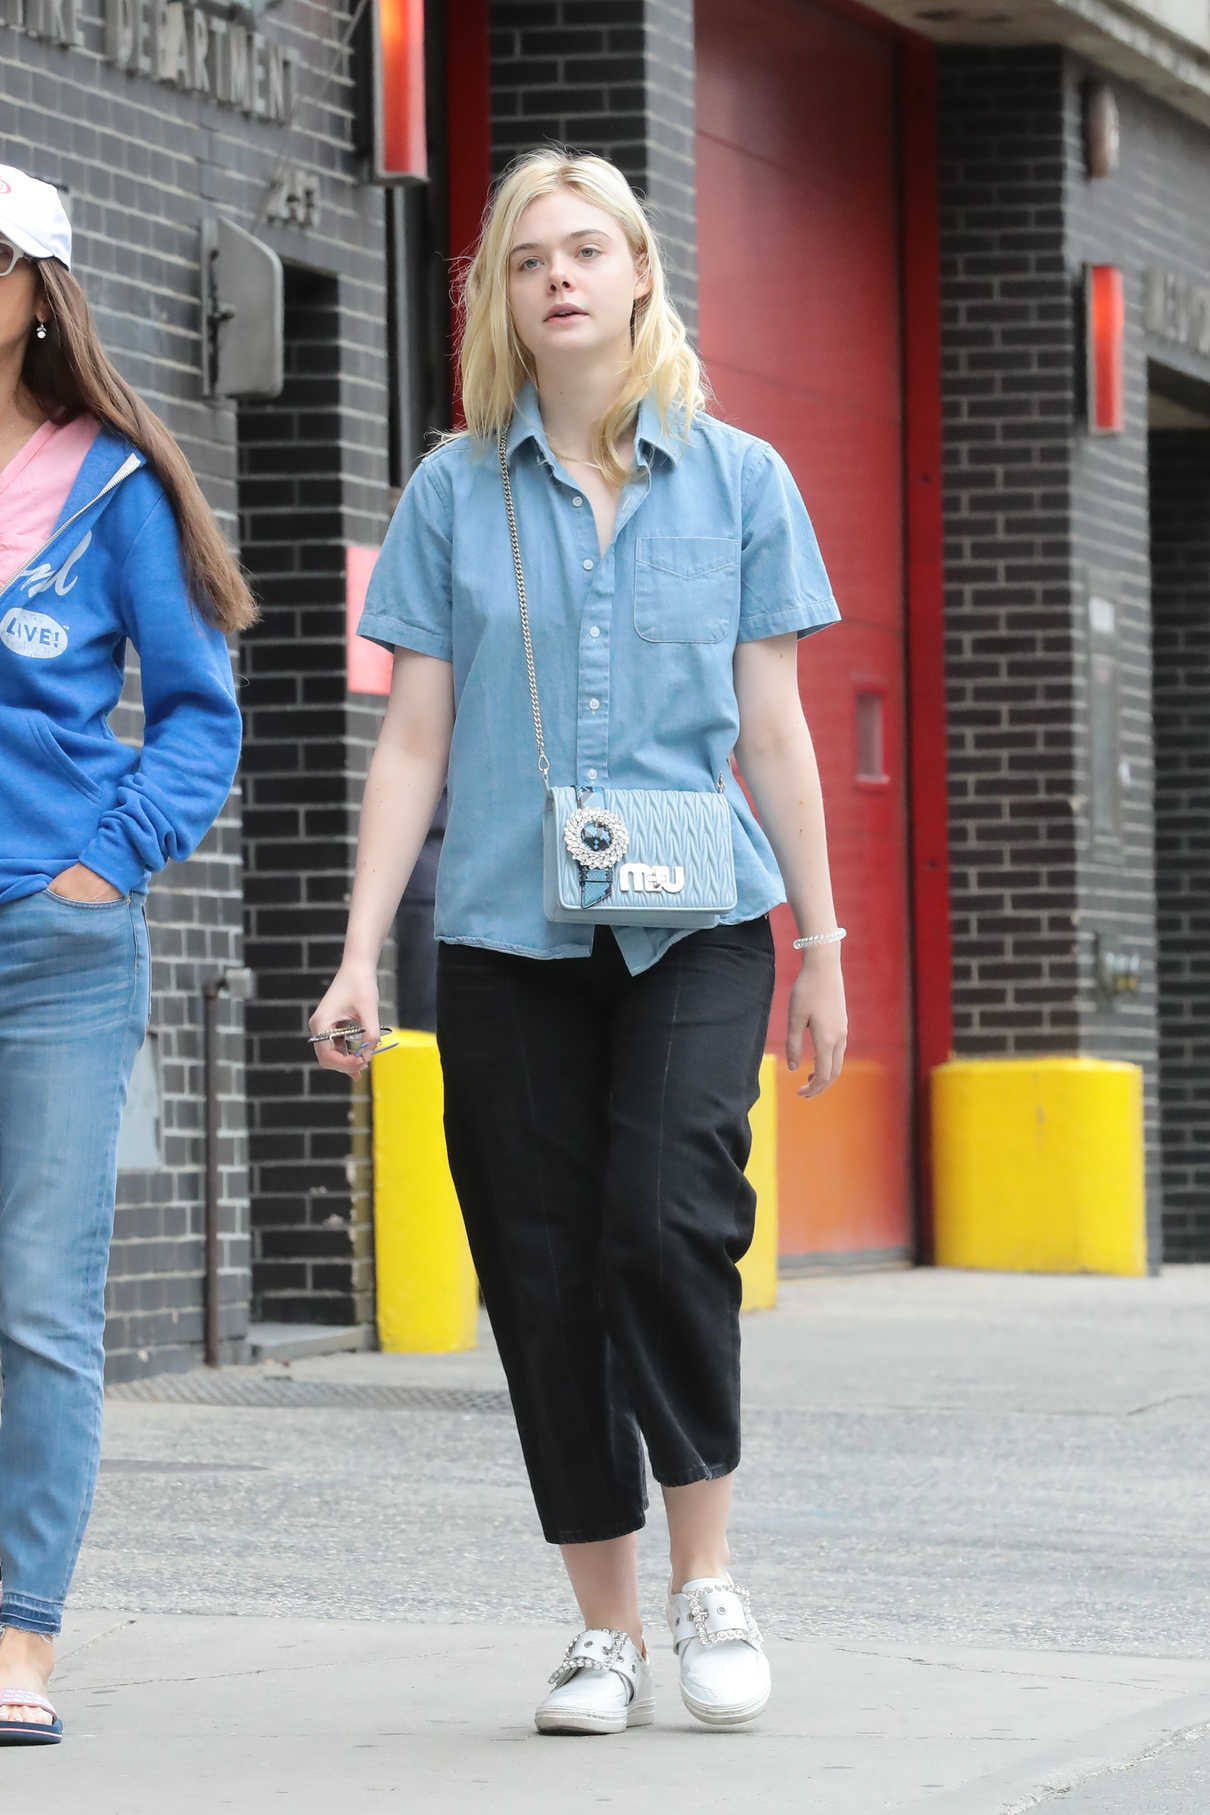 Elle Fanning Was Seen With Her Mother Heather Joy Arrington Out in NYC ...